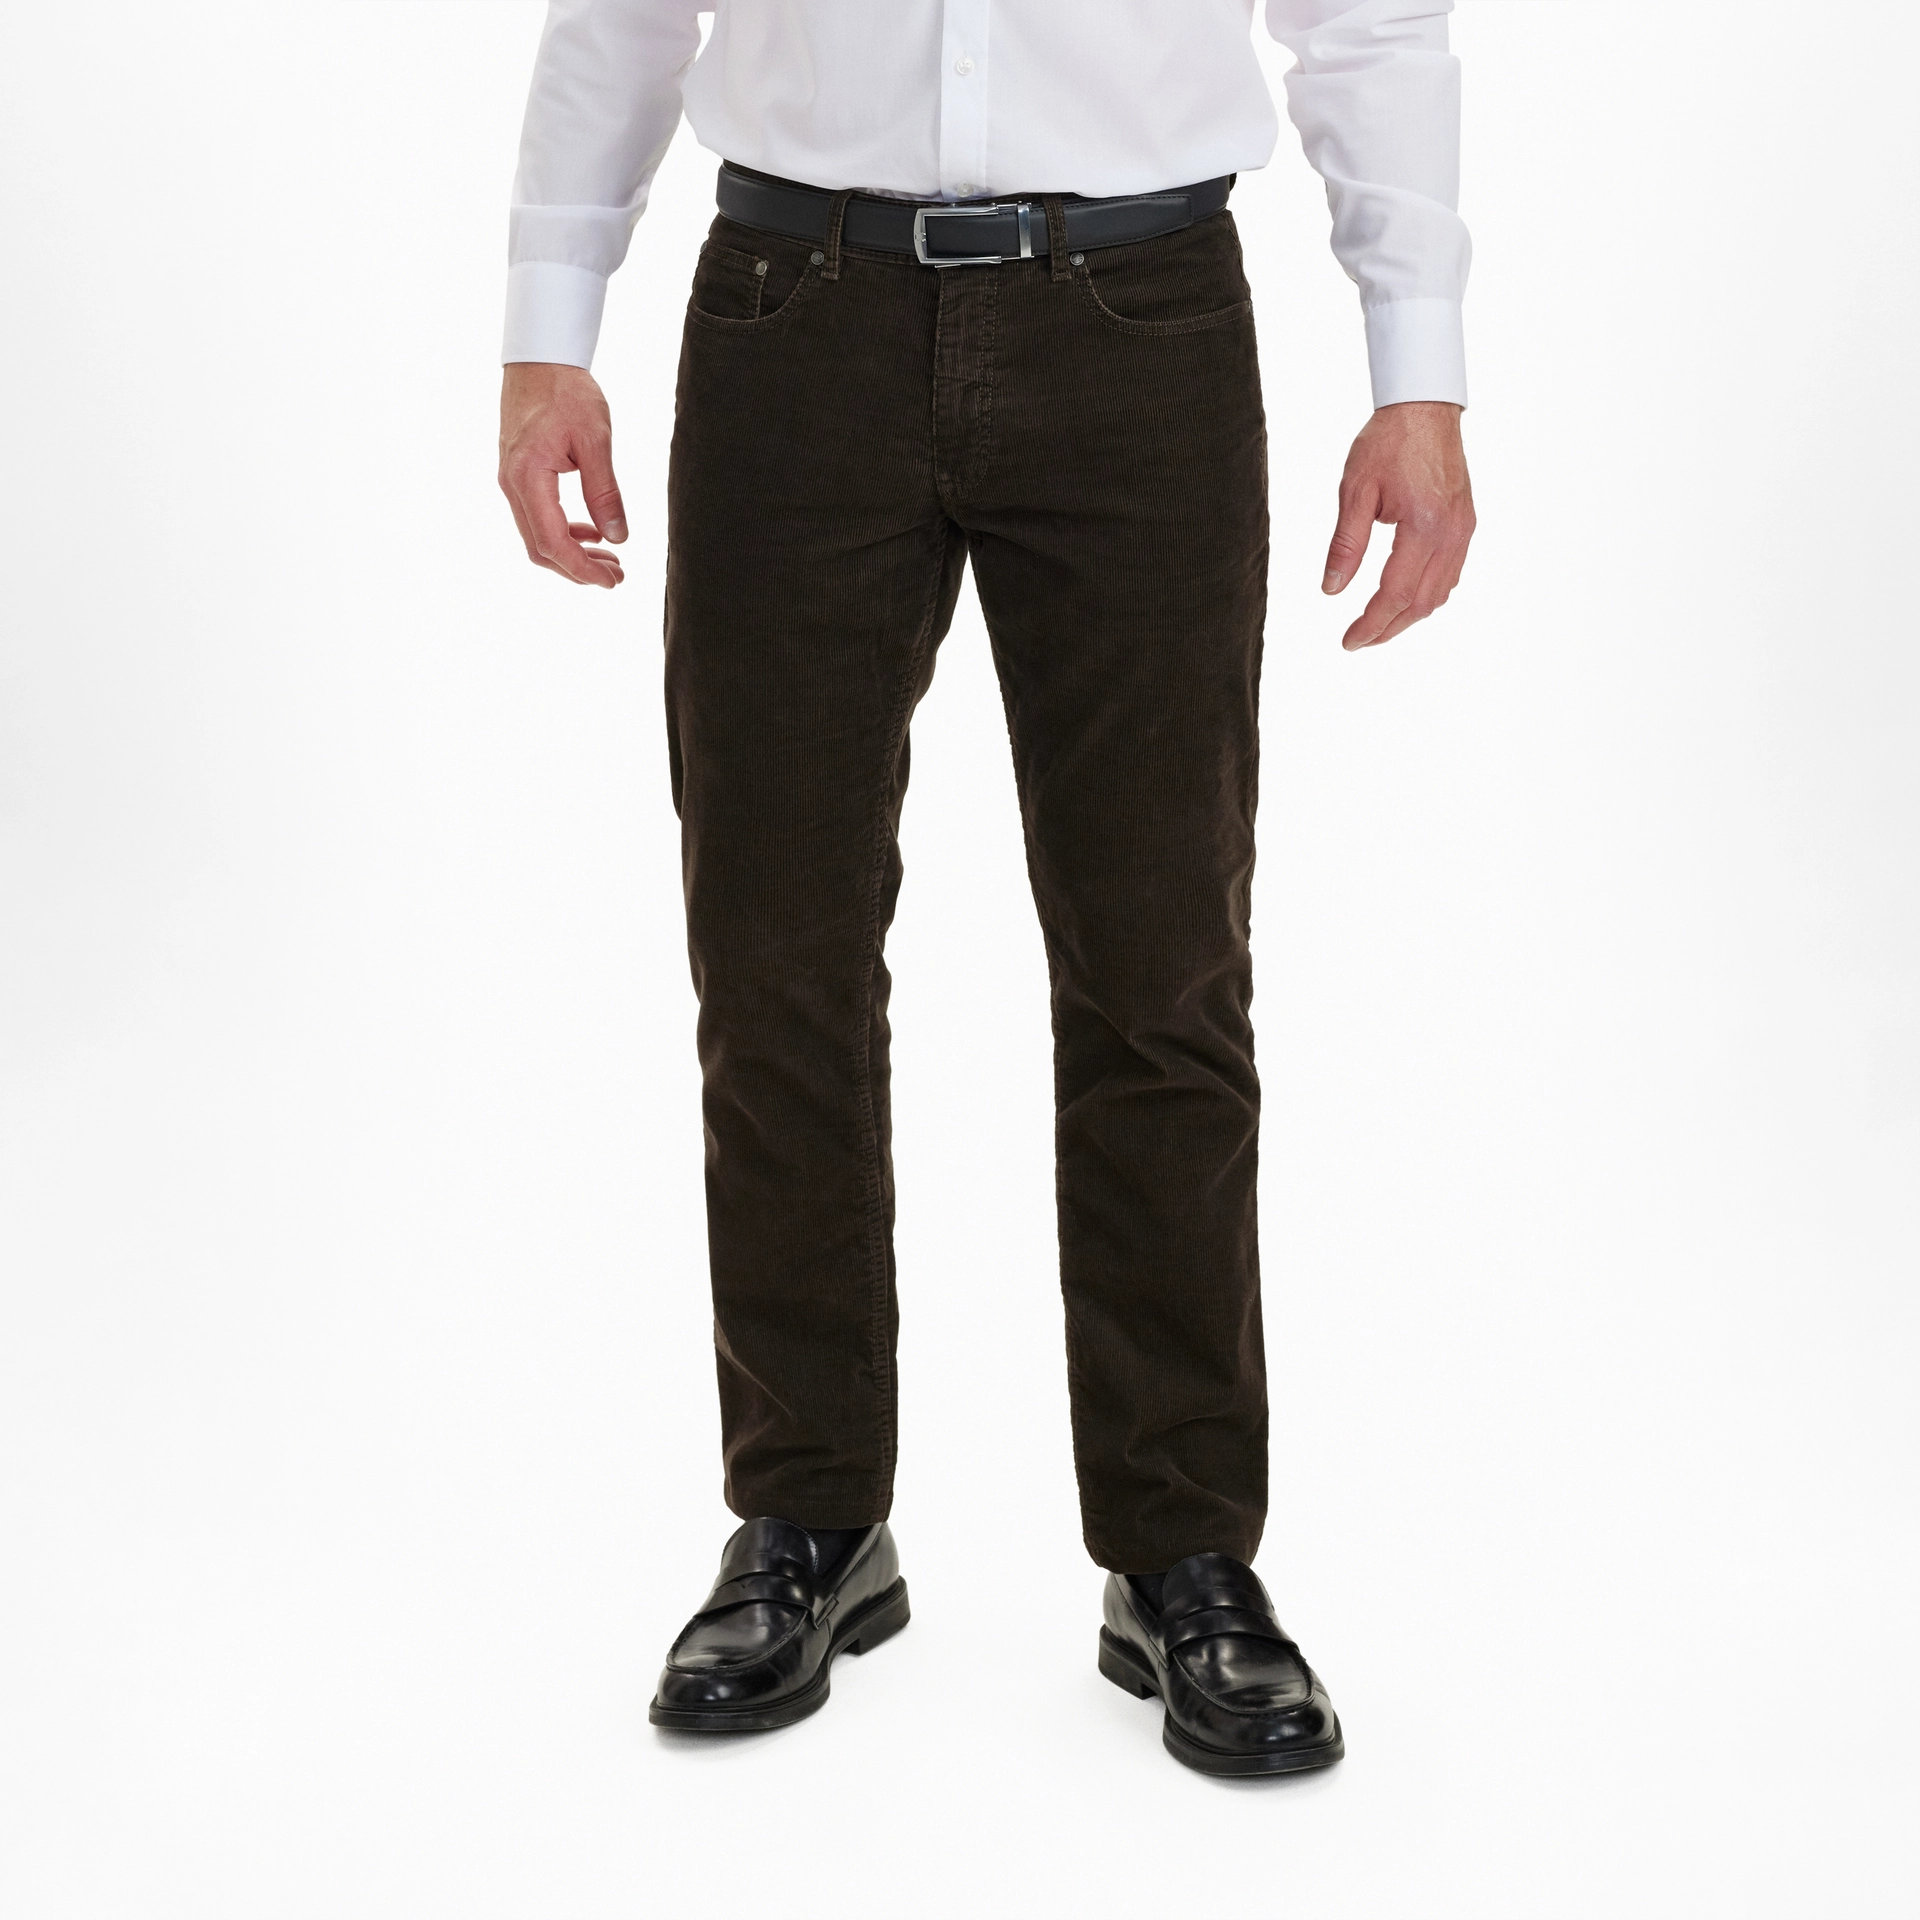 Cordhose - Fitted fit